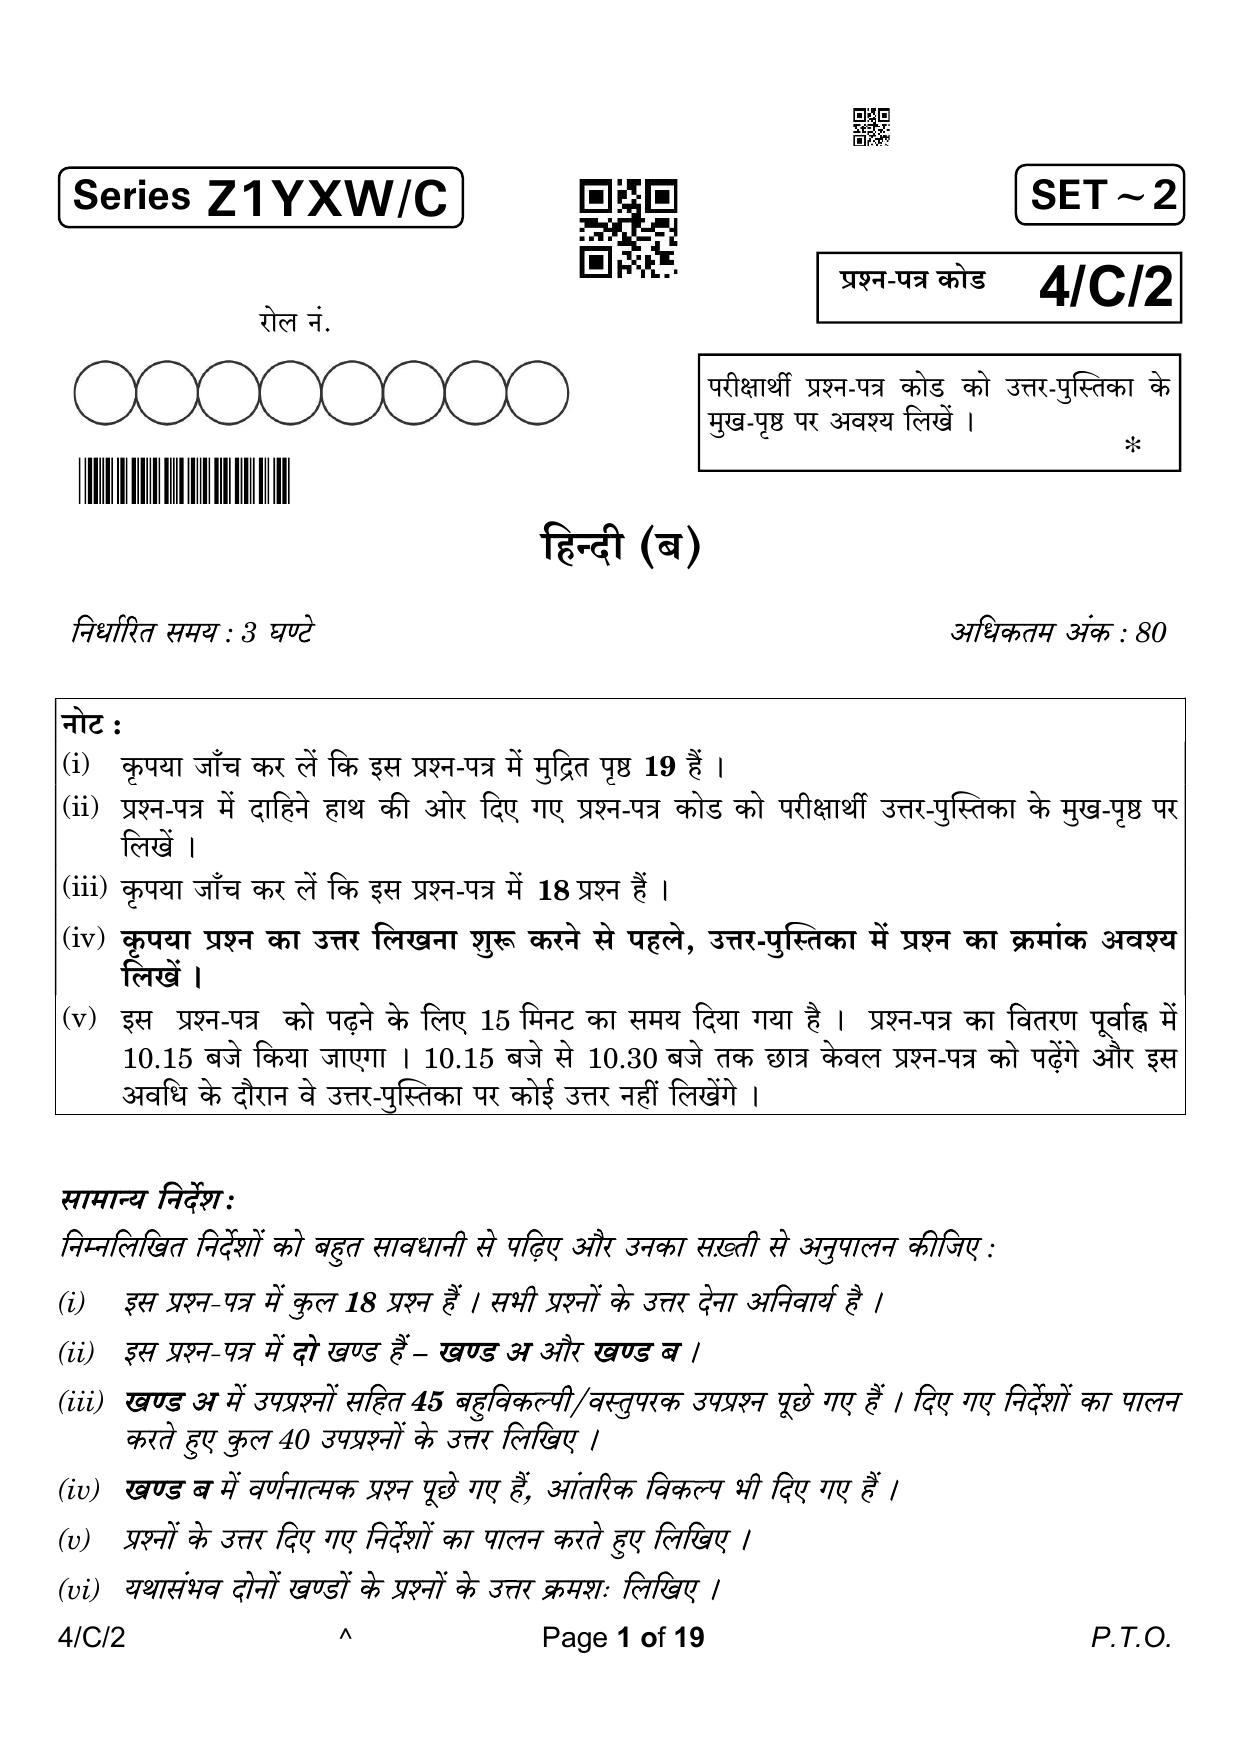 CBSE Class 10 4-2 Hindi B 2023 (Compartment) Question Paper - Page 1